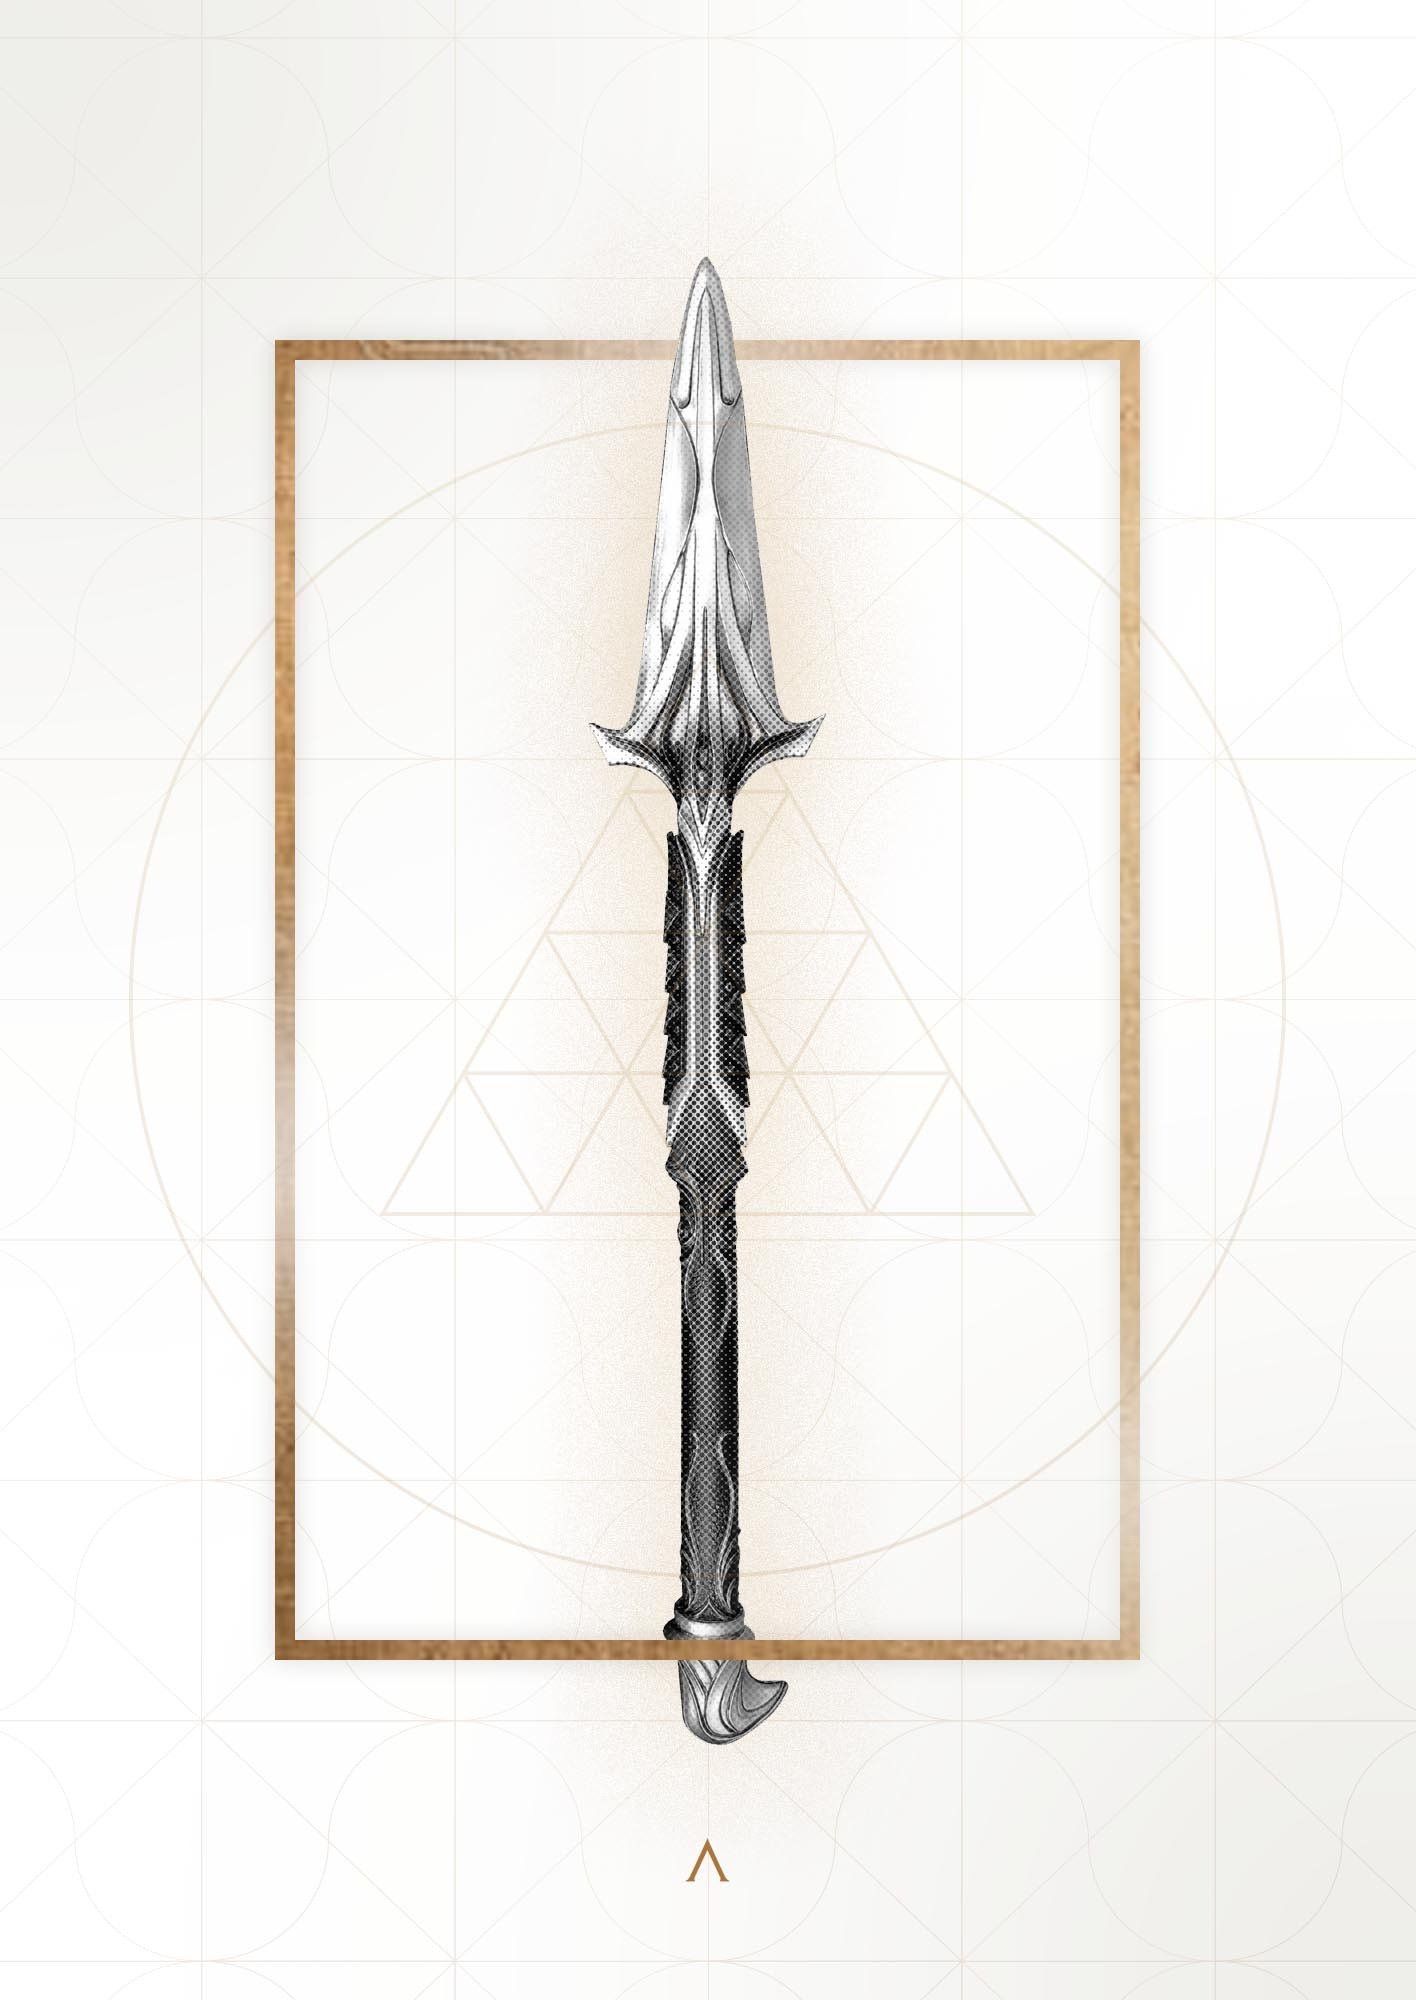 AC Odyssey spear 1. Assassins creed art, Assassin's creed wallpaper, Assassins creed game